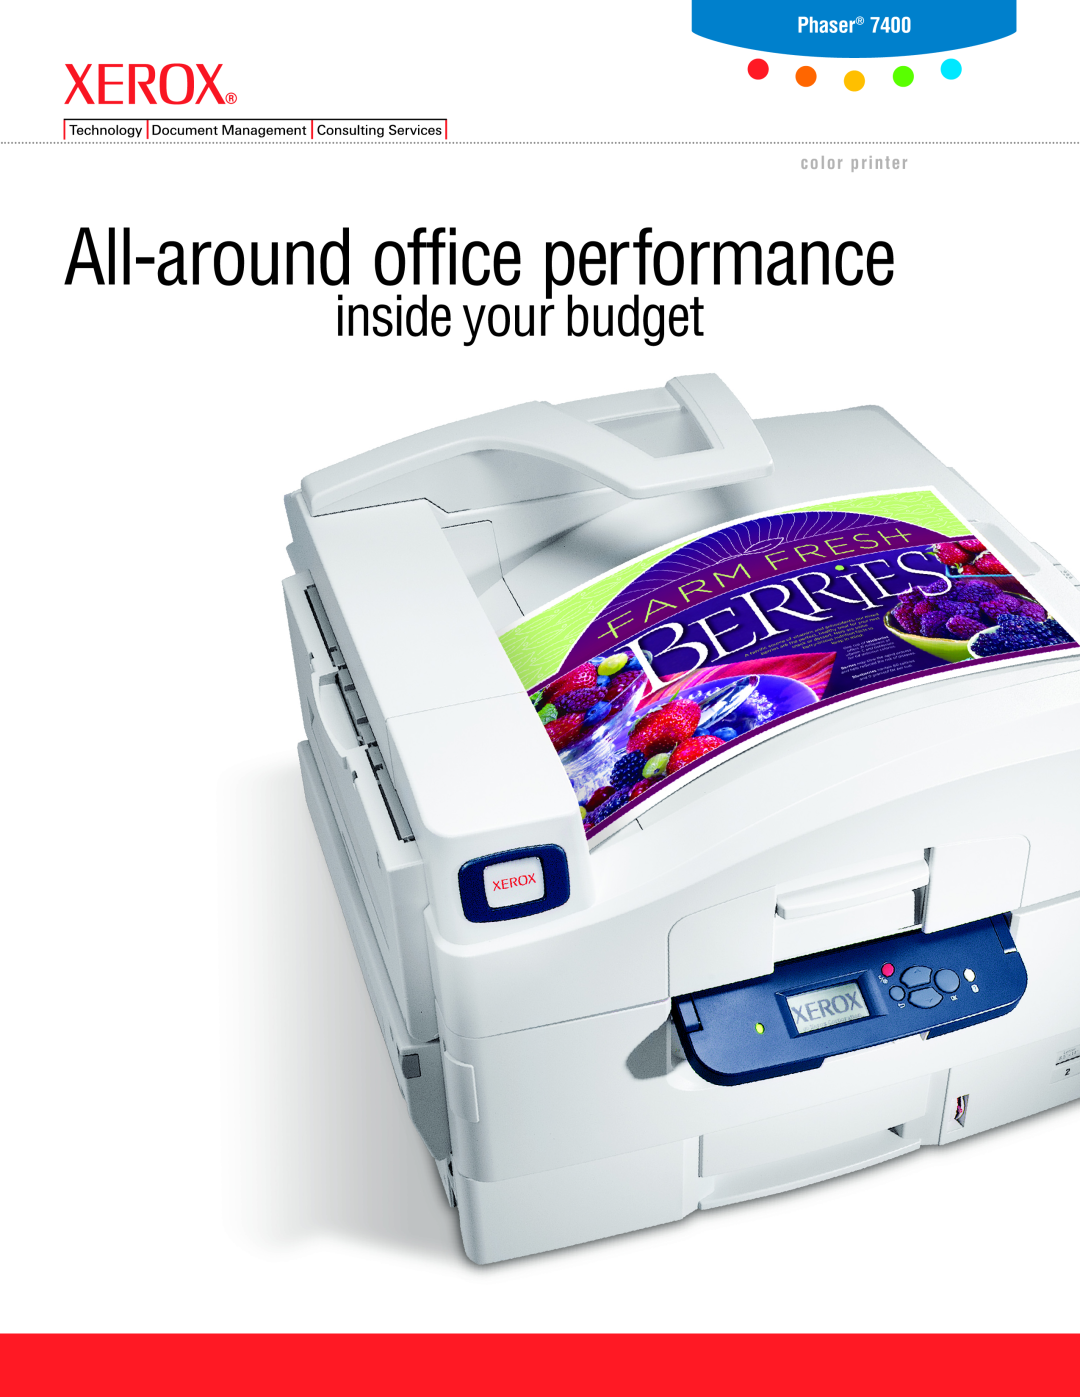 Xerox 7400 manual Phaser, All-aroundoffice performance, inside your budget, color printer 